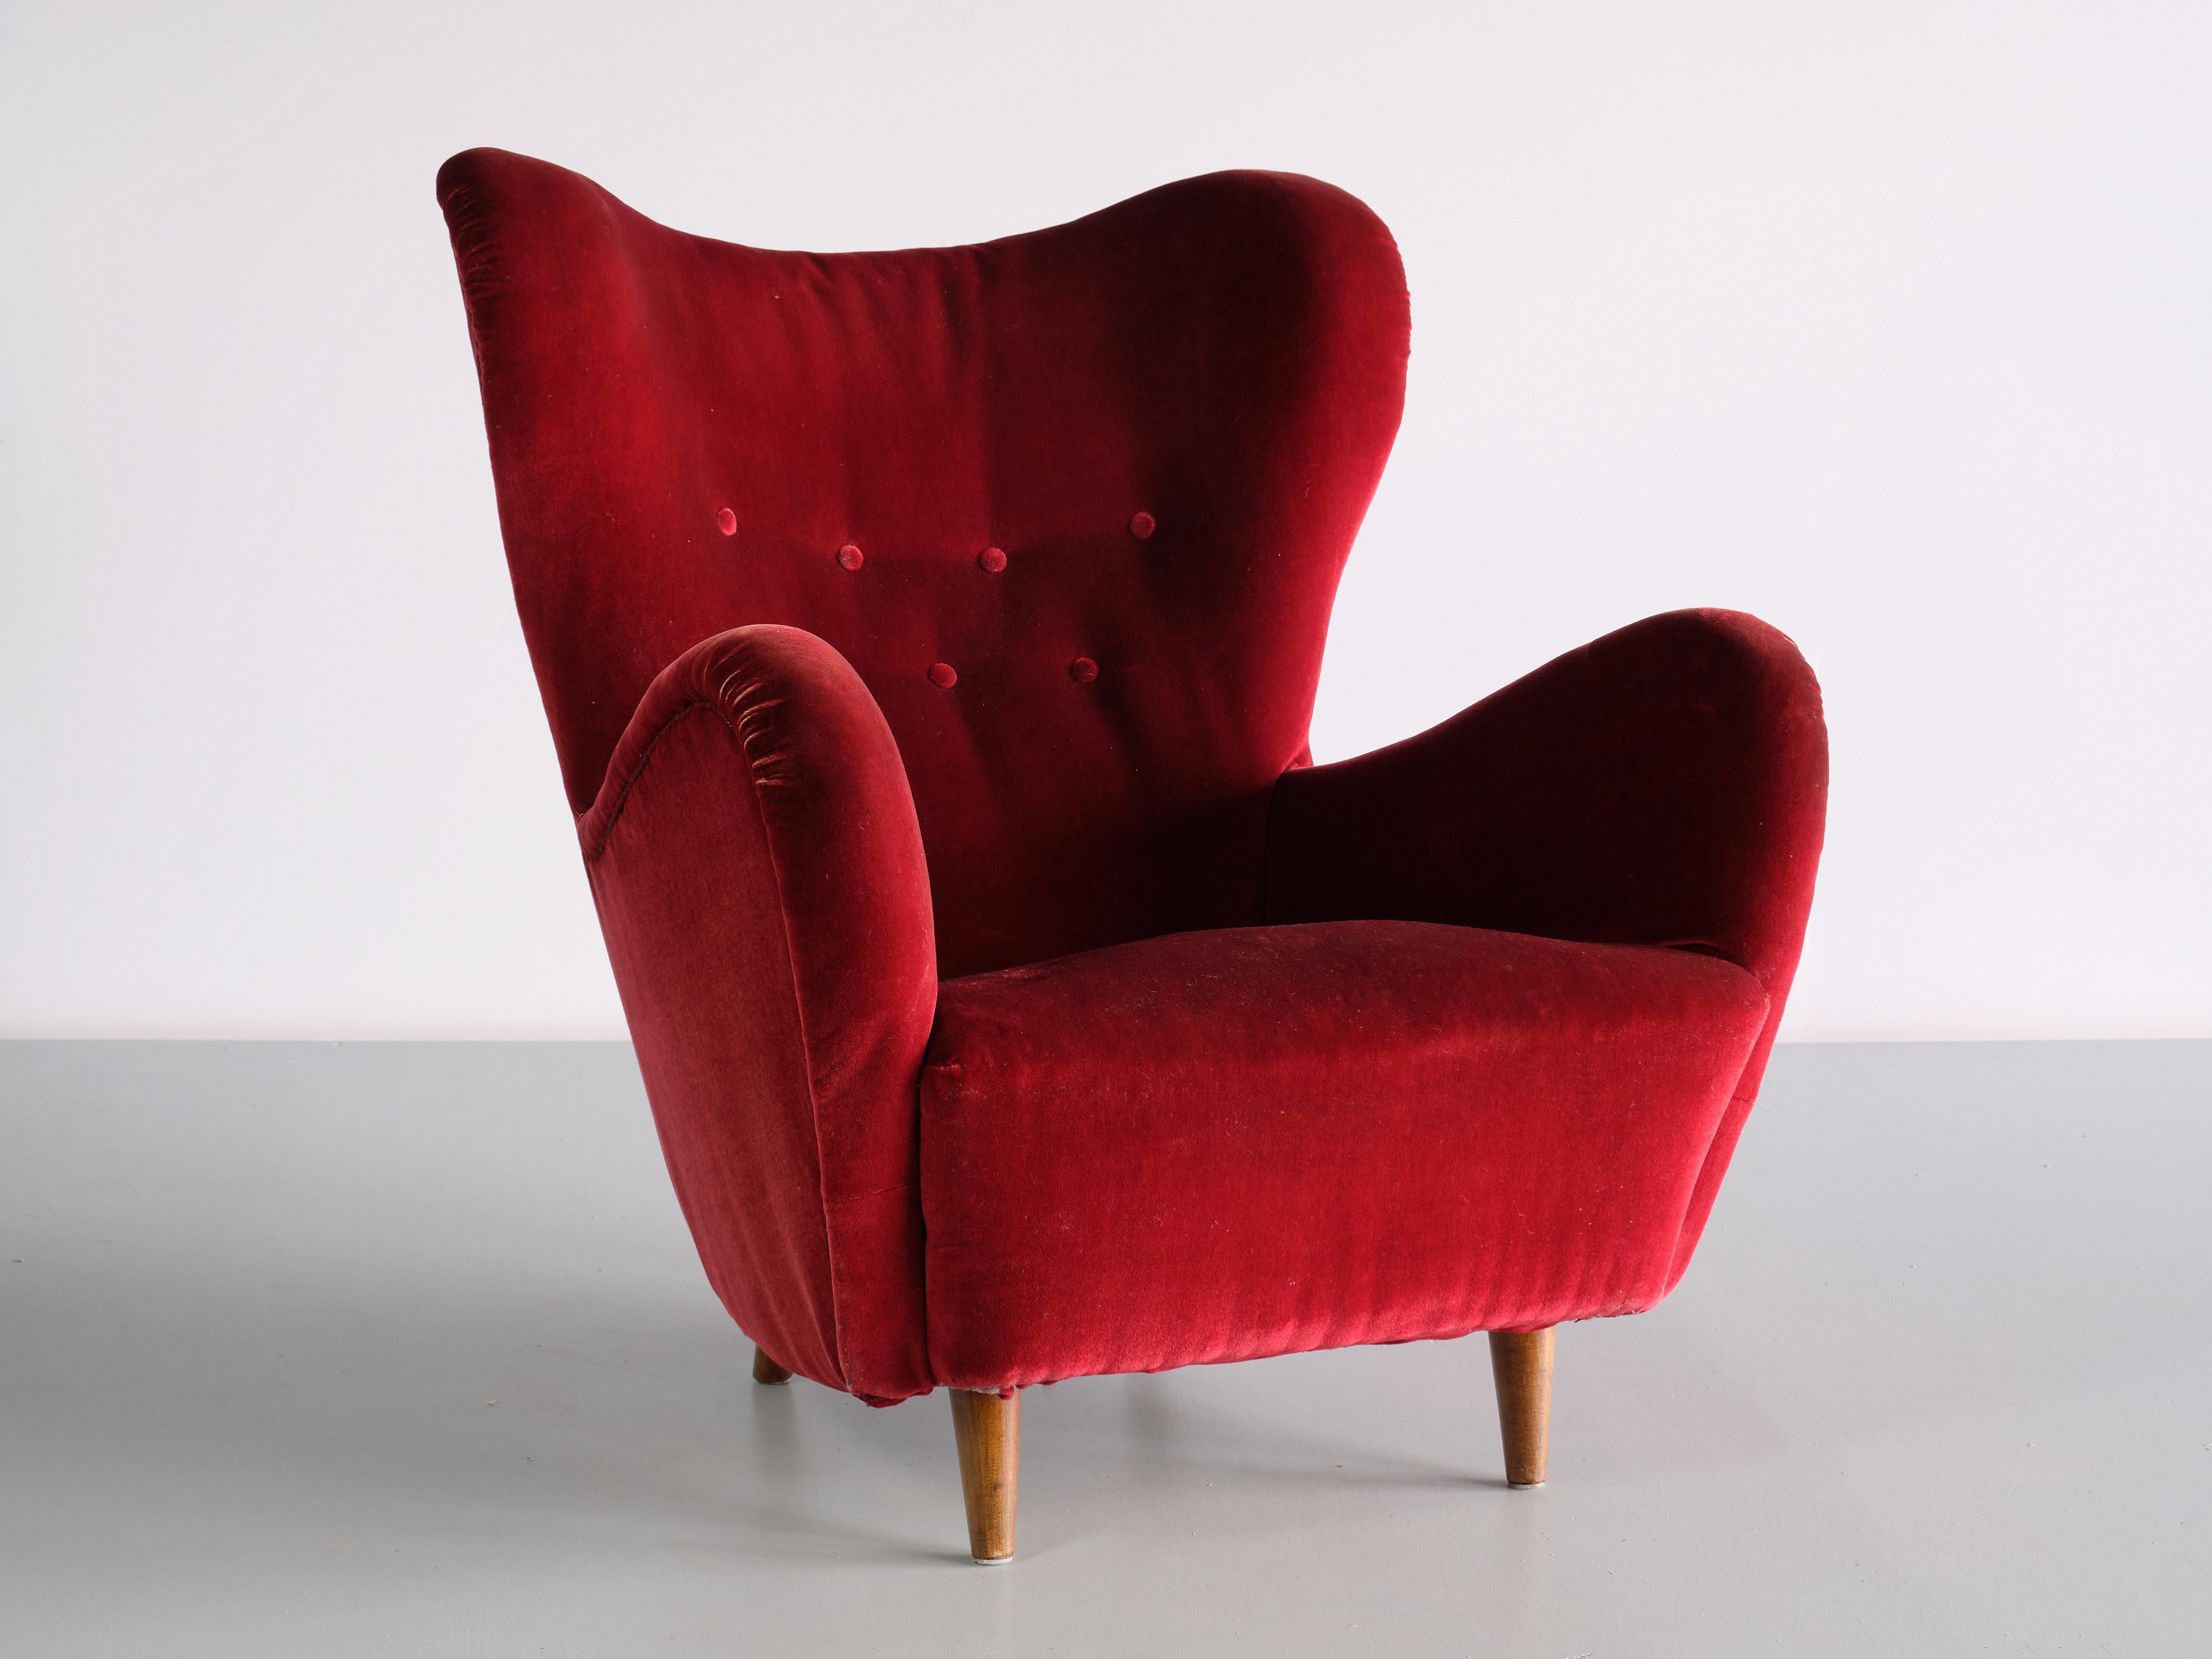 This exceptionally rare armchair was designed by Otto Schulz and produced by Boet in Go¨teborg, Sweden, 1946. The rounded, organic lines of the design create a striking silhouette. Its generous proportions and the high back make this a sumptous and